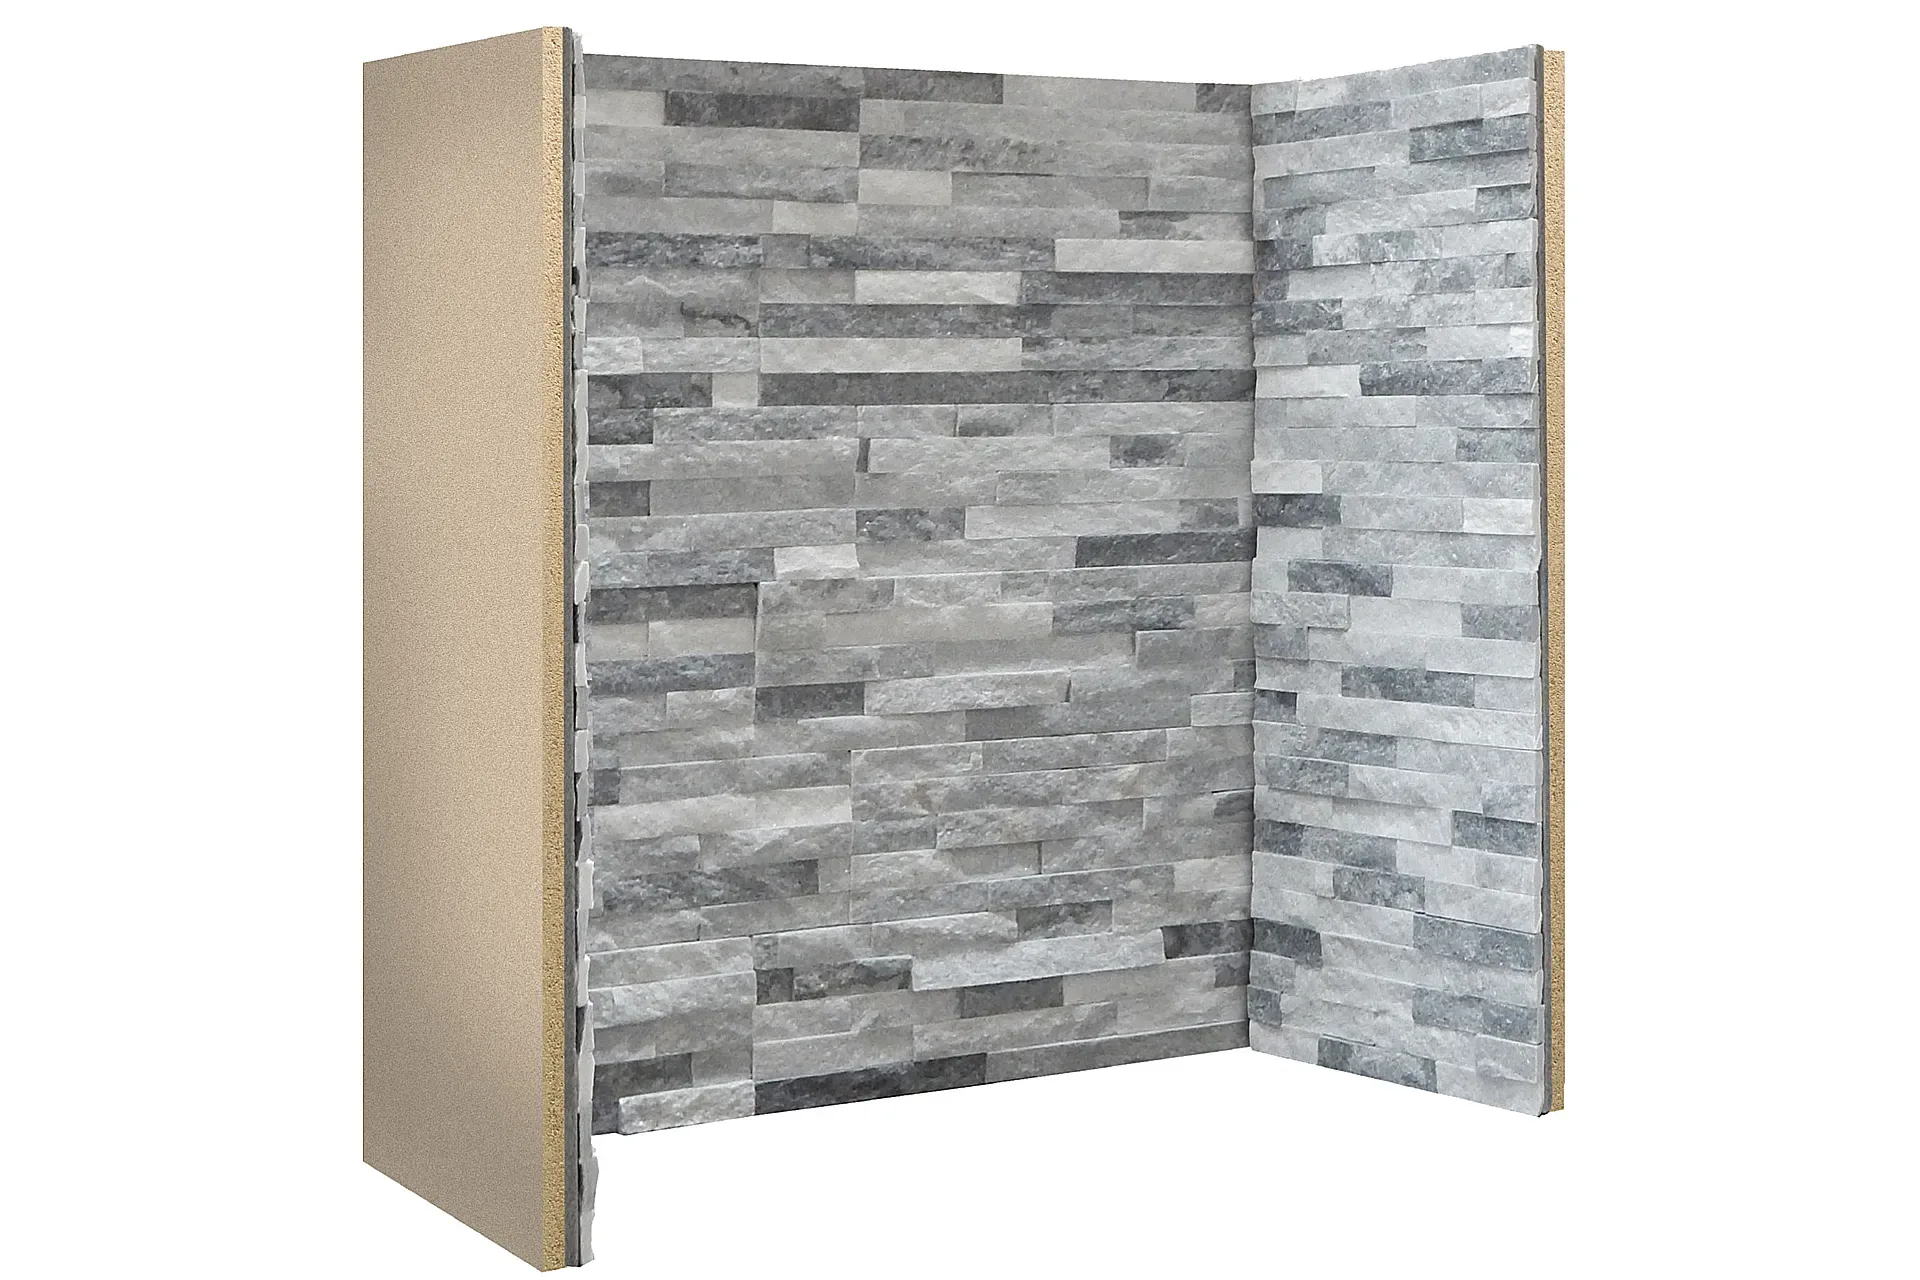 The Gallery Collection GREY WHITE STAGGERED SLATE Chamber